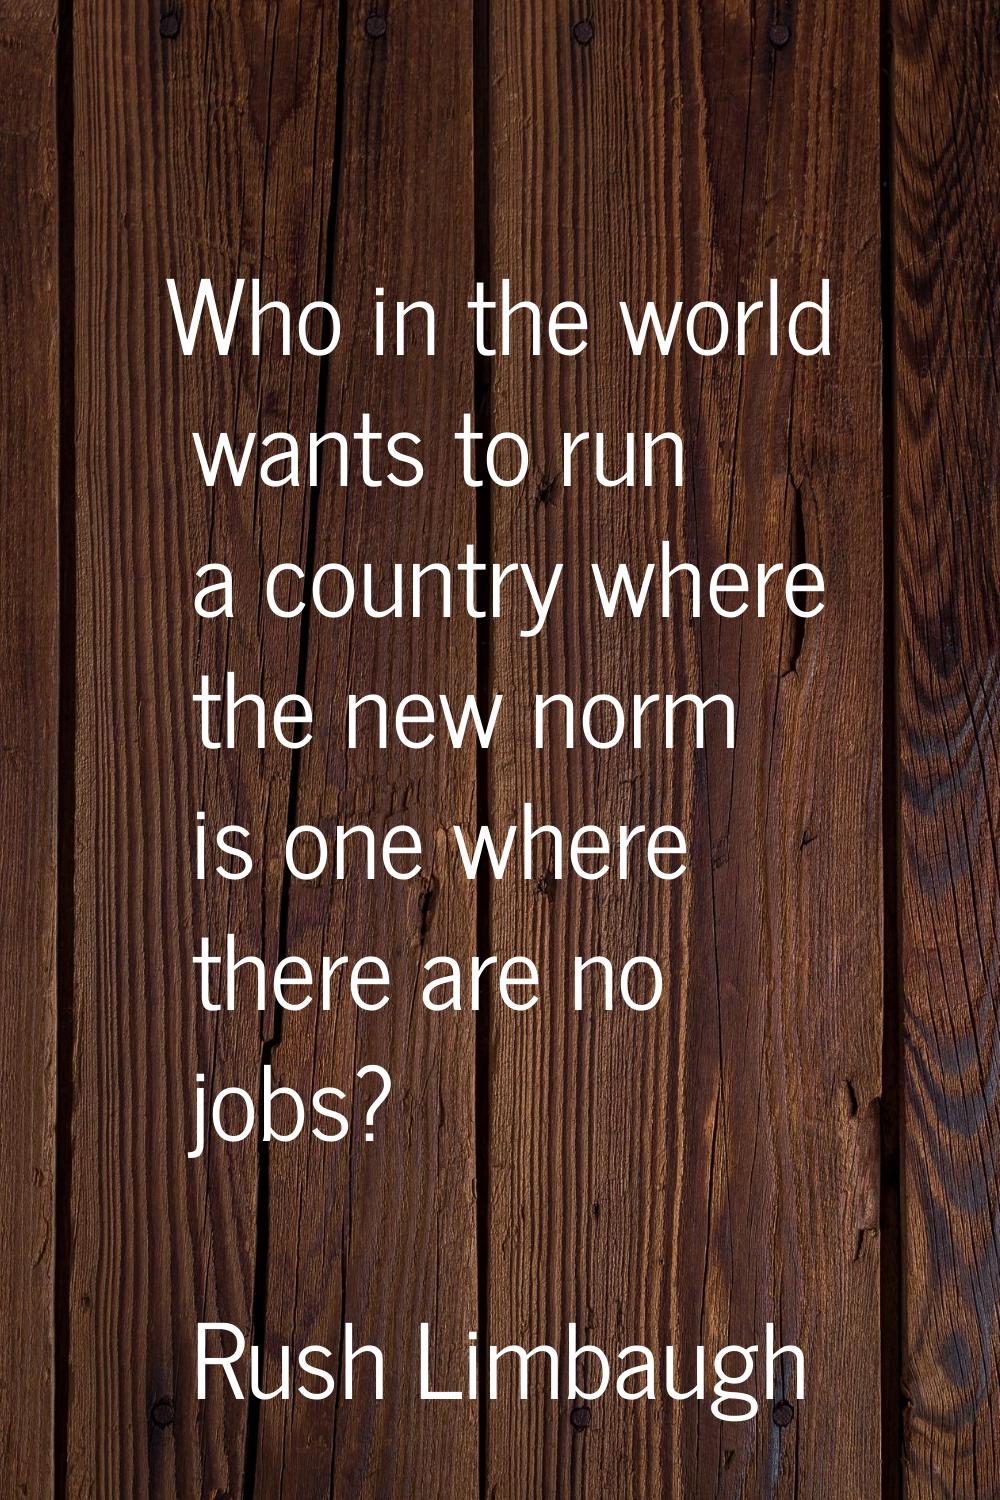 Who in the world wants to run a country where the new norm is one where there are no jobs?